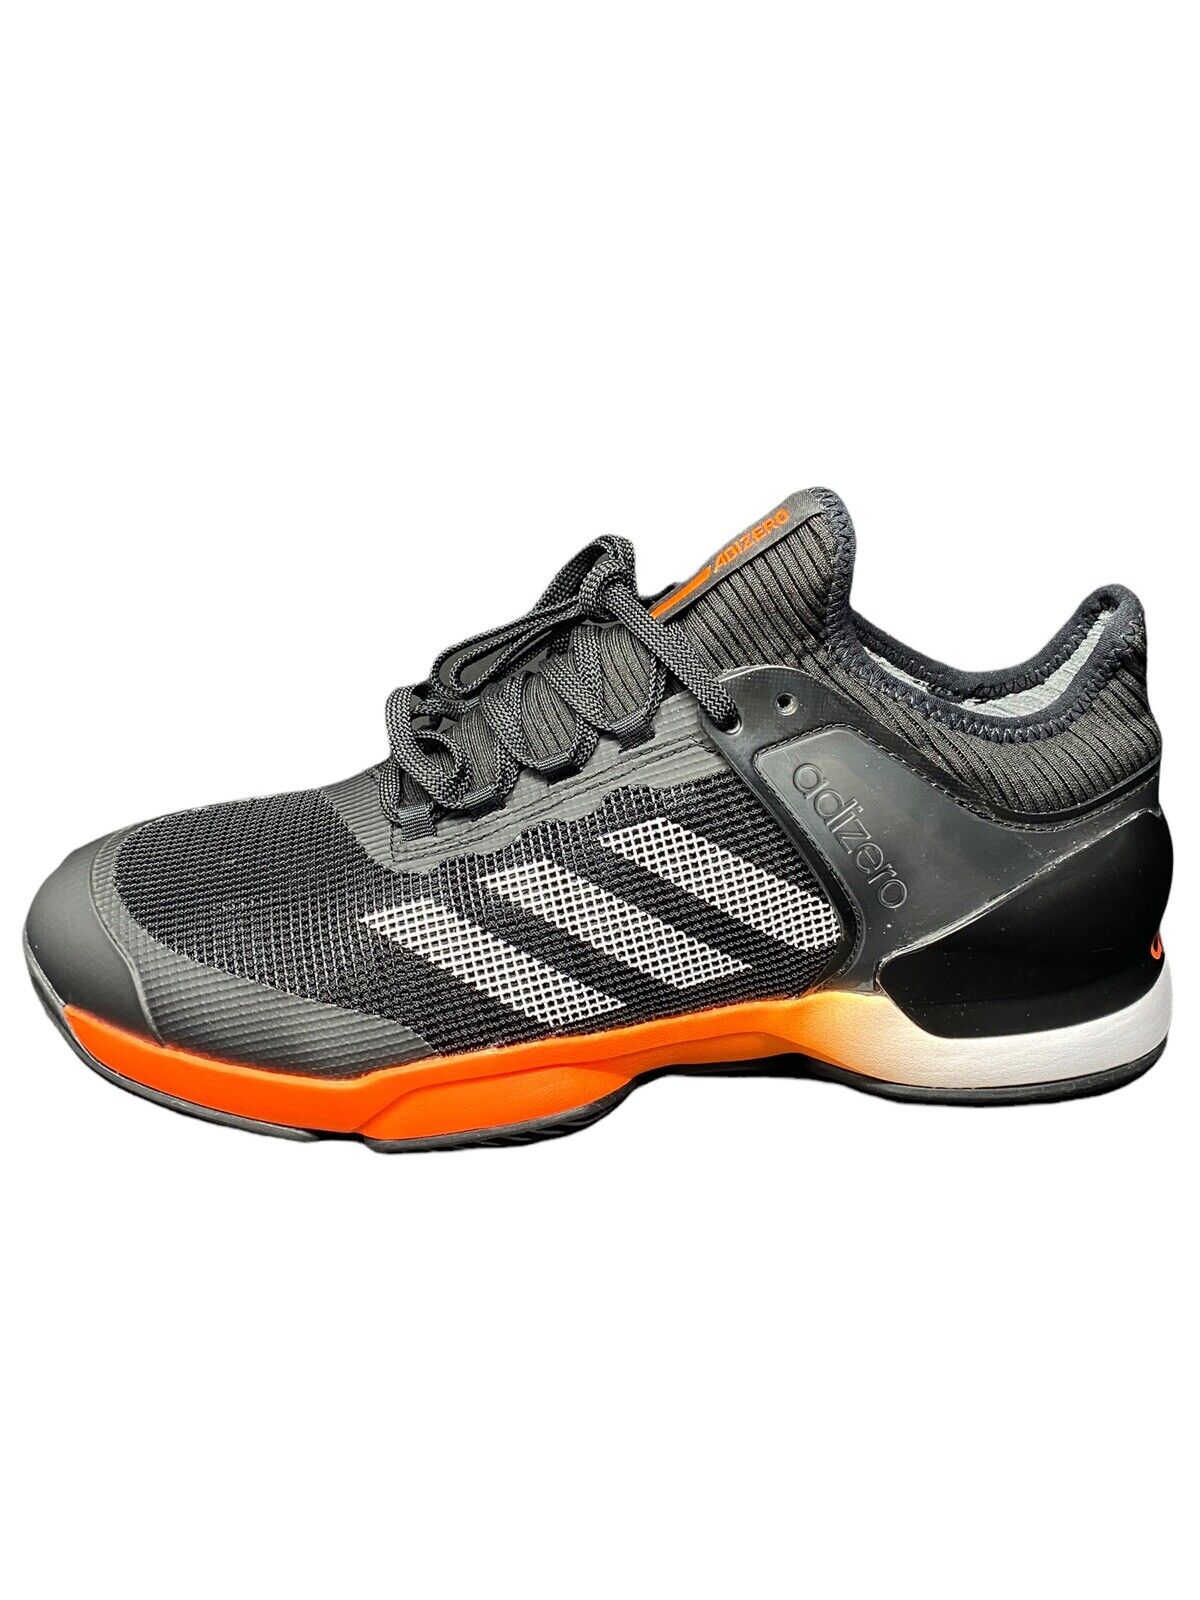 Adidas Men's 11 Uber-Sonic 2 Clay Tennis Shoes Black Training Sneakers FV1458